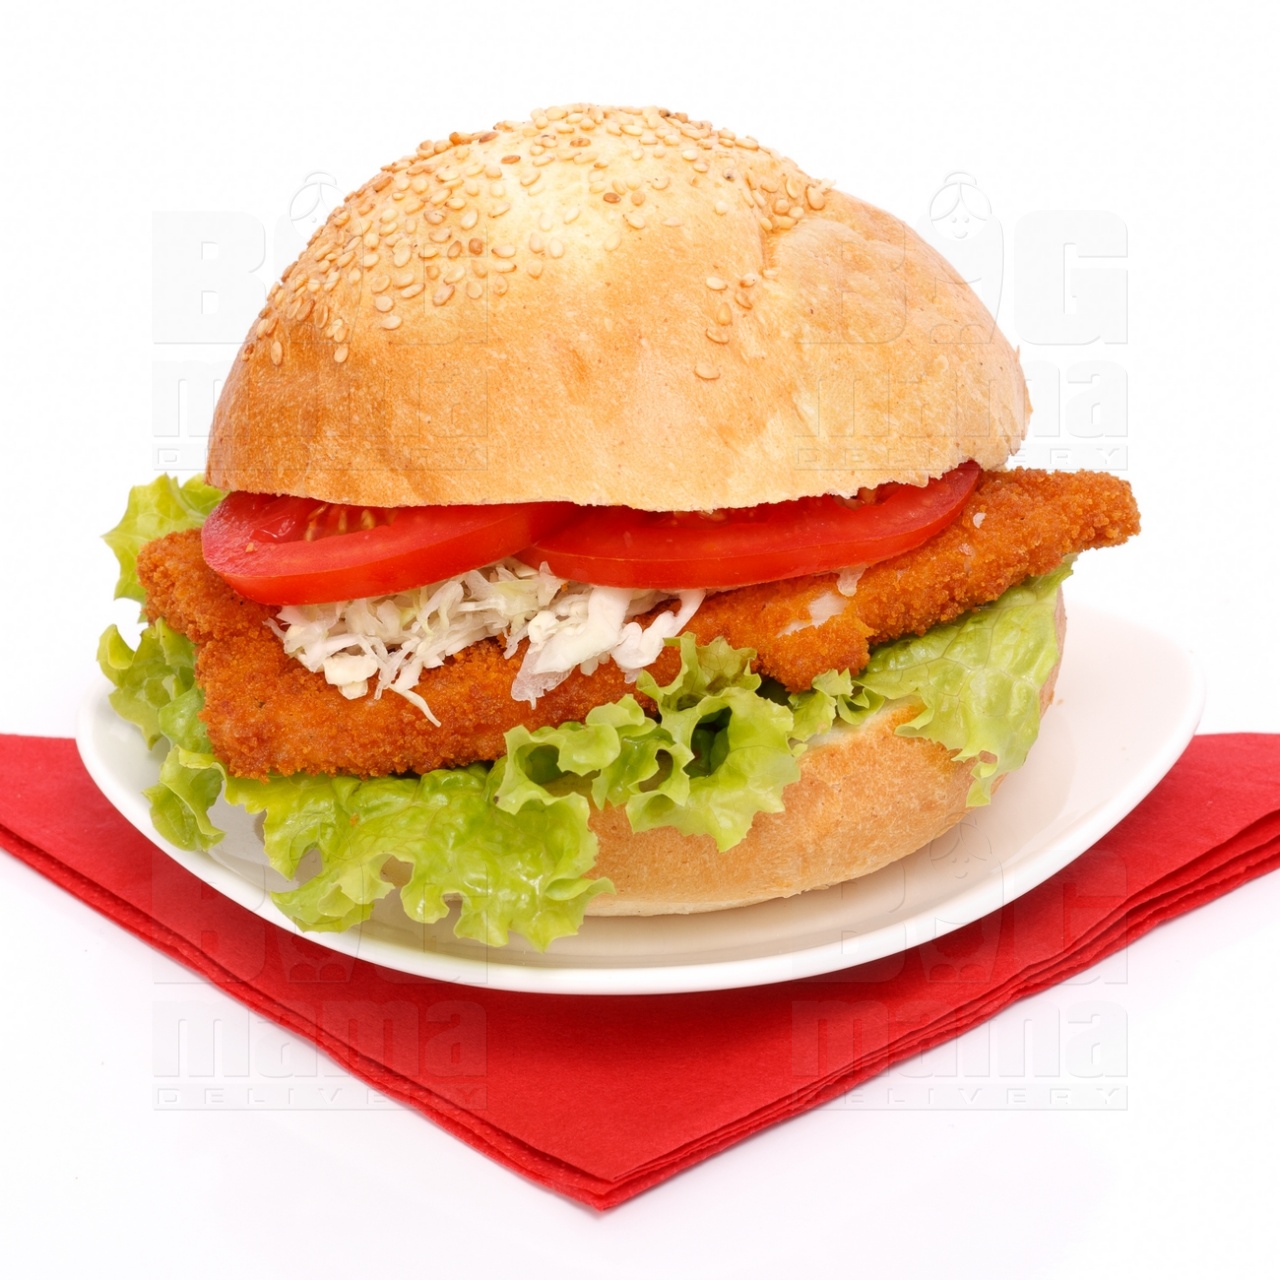 Product #59 image - Sandwich with chicken schnitzel